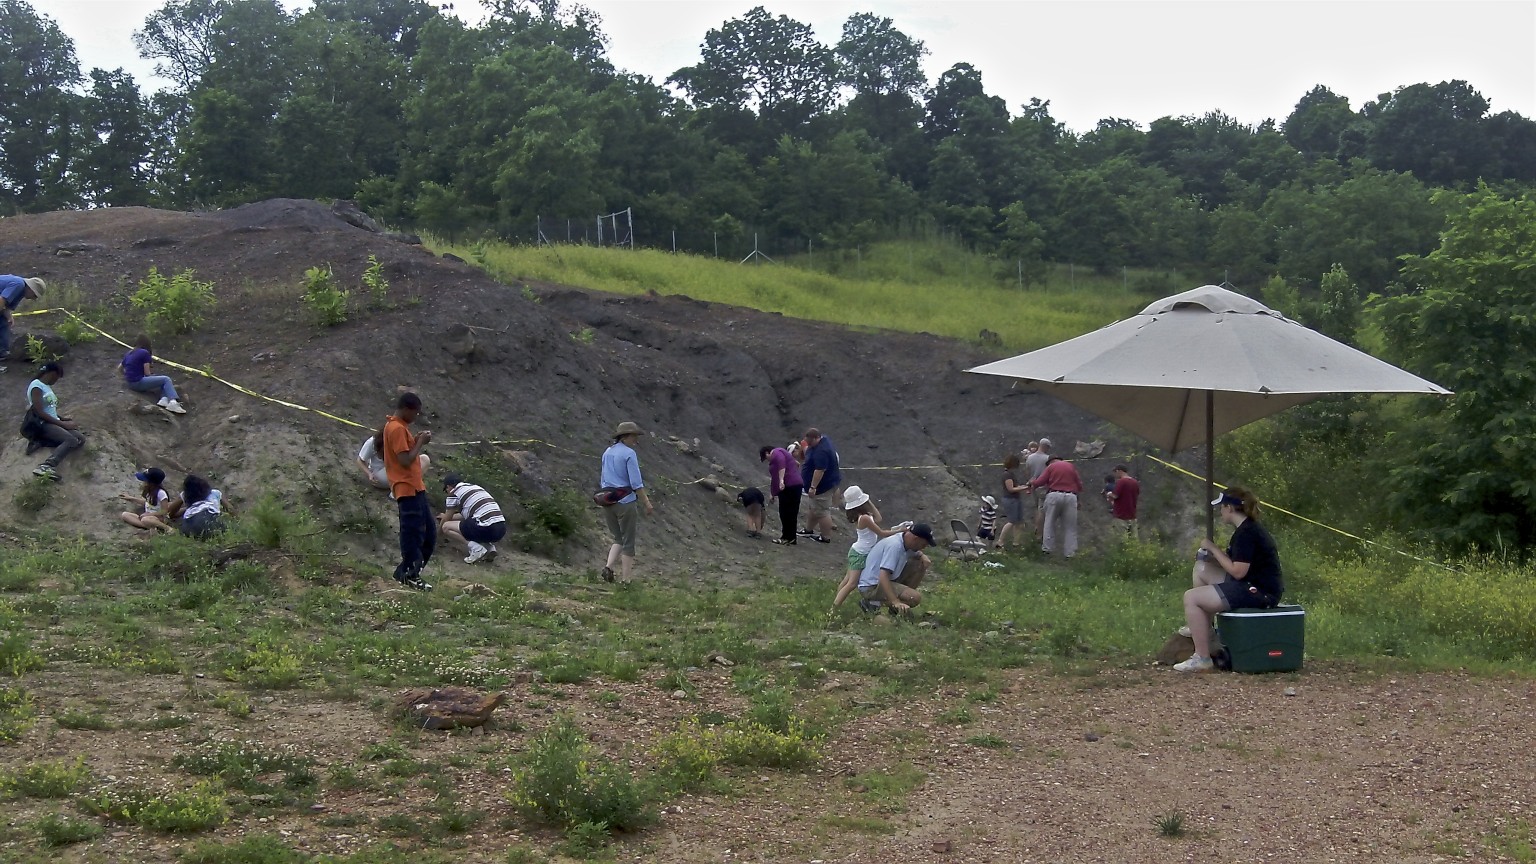 Photograph of people fossil hunting on an exposure of Arundel Clay at Dinosaur Park in Maryland. The photo shows a low hill with exposed brown sediment and grass growing on top. People are hunting for fossils at the base and on the slopes of the cliff.